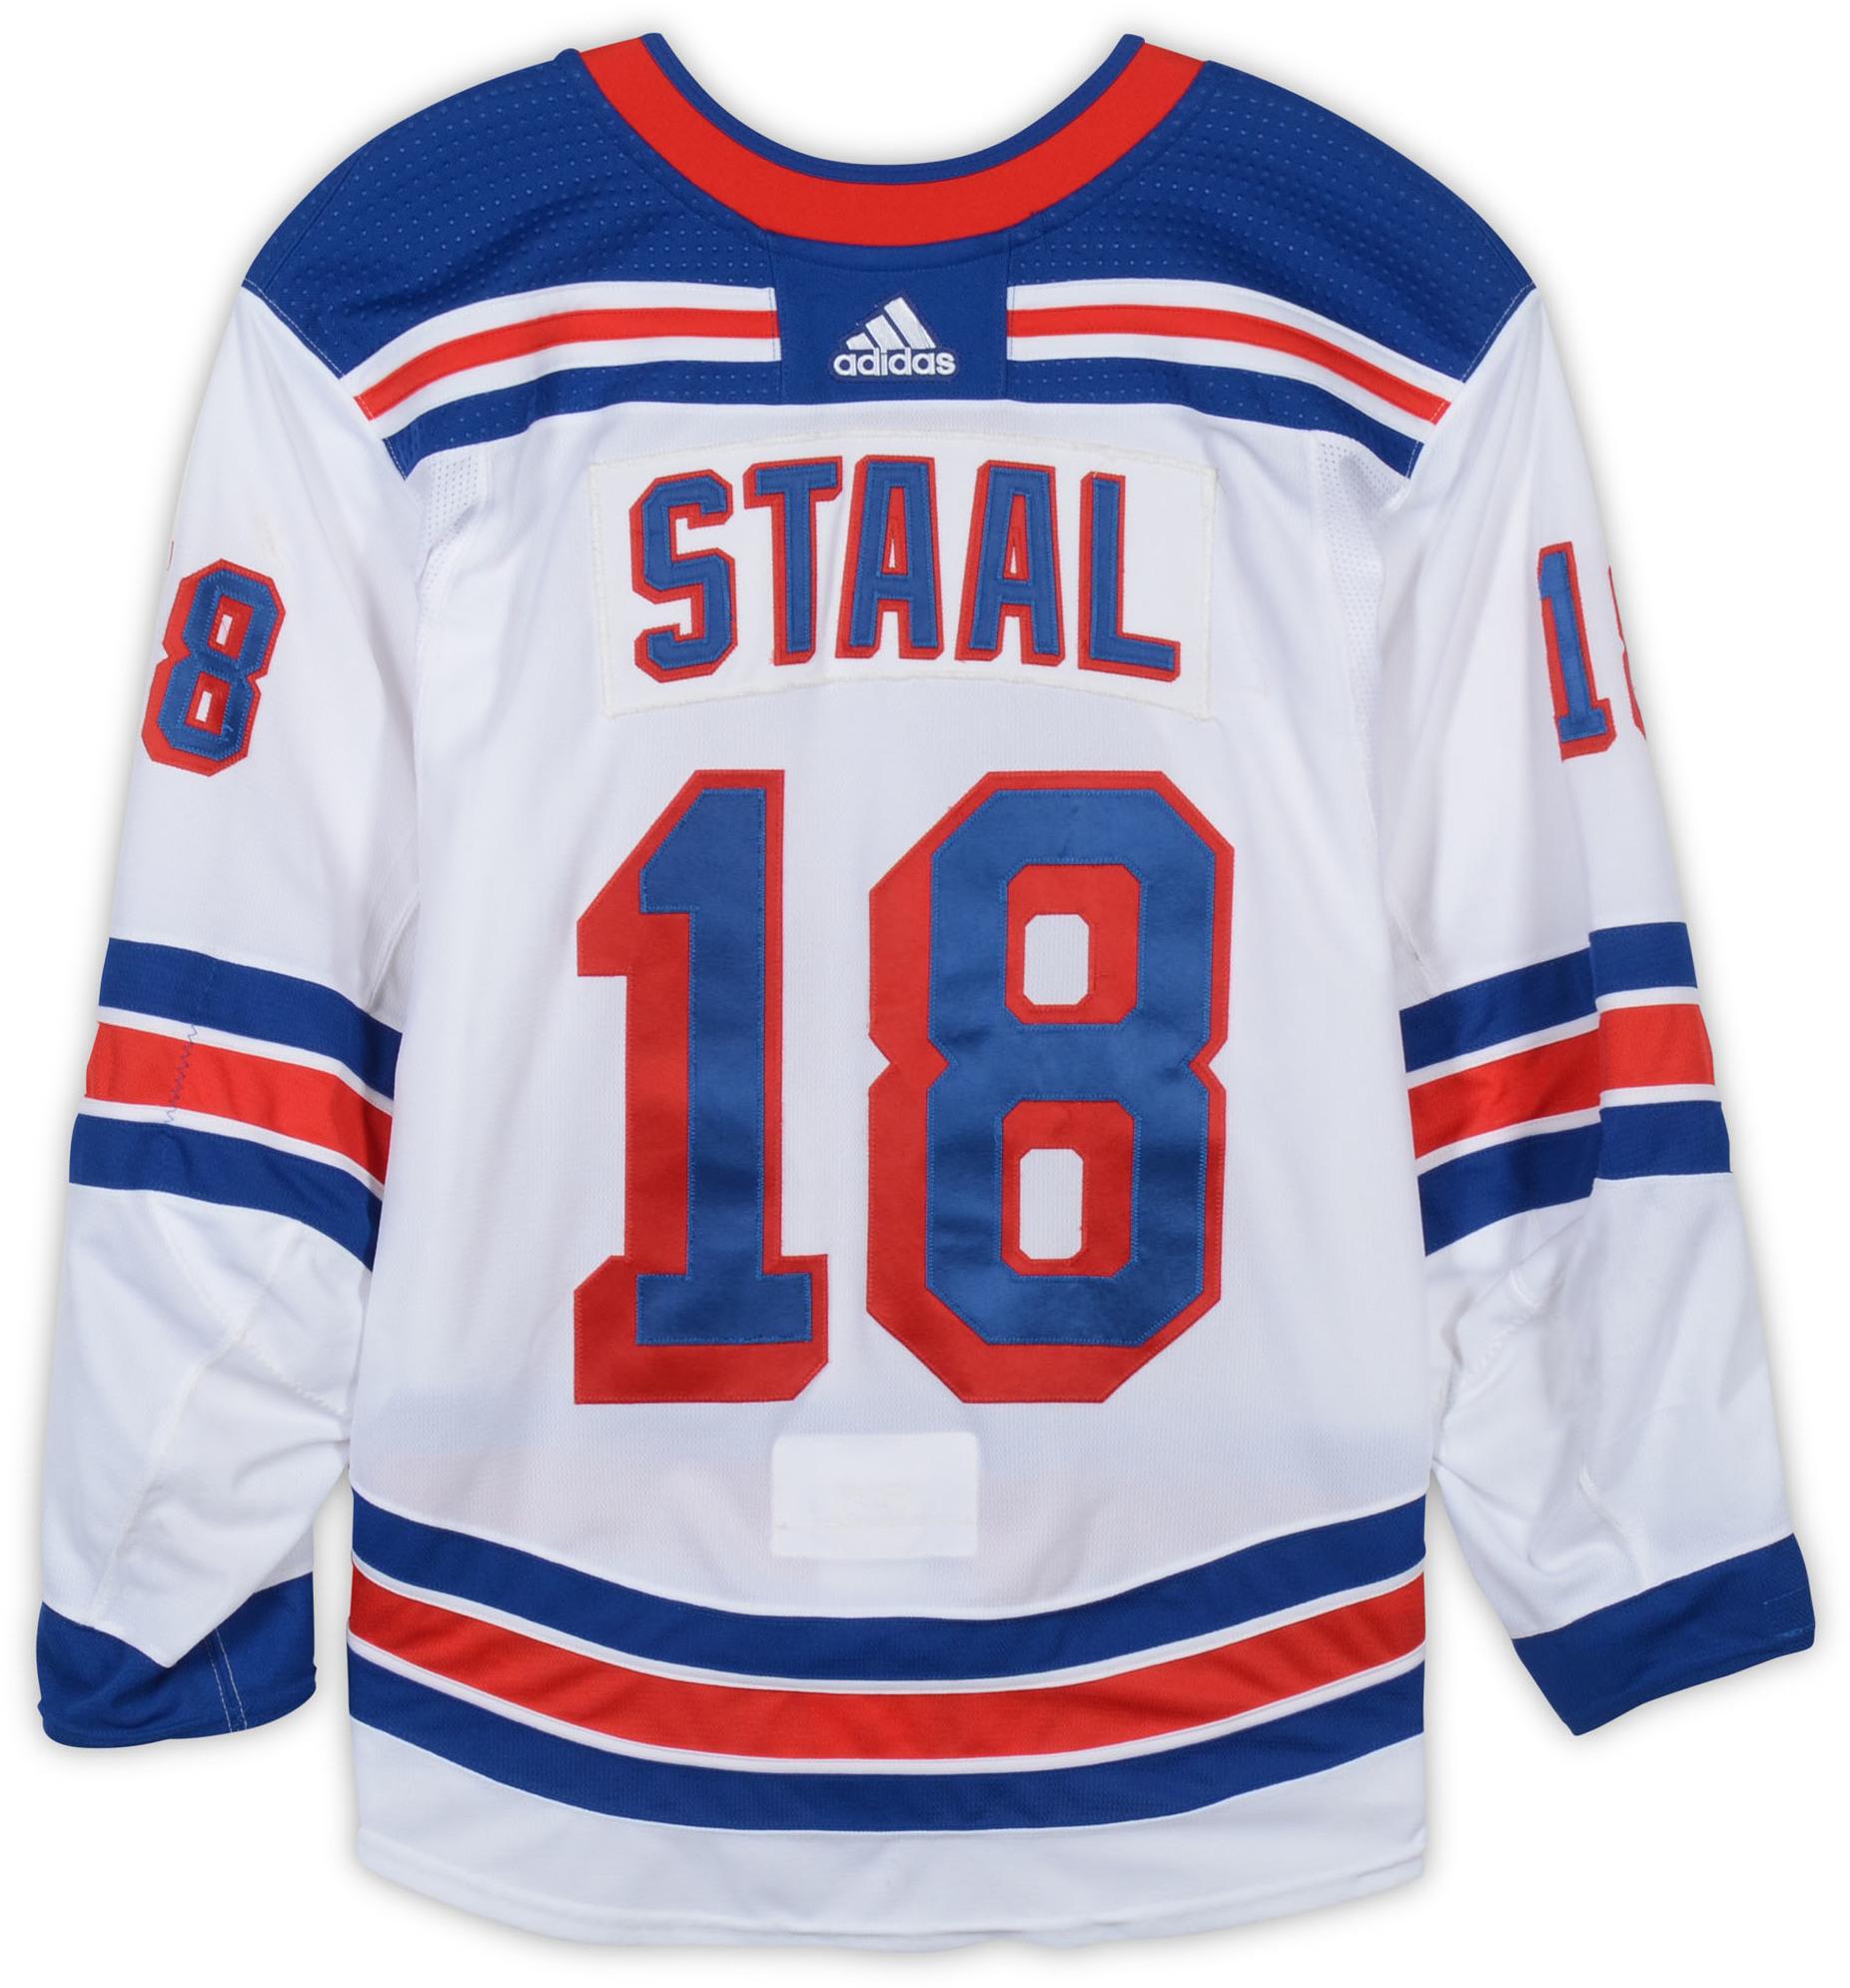 staal jersey